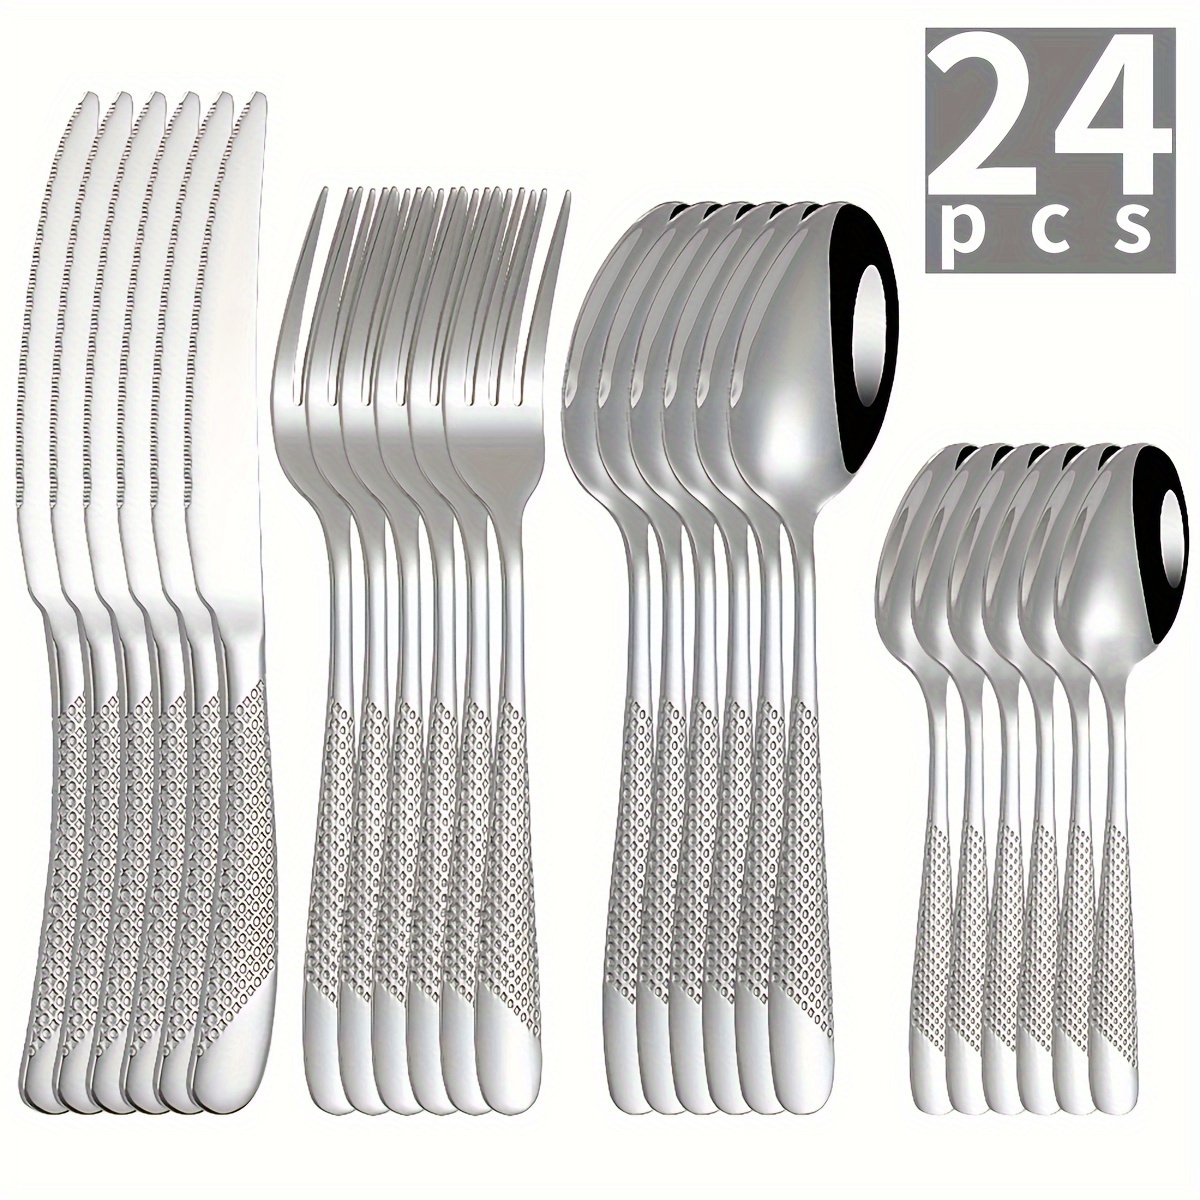 

24pcs, Stainless Steel Star Cutlery Set - Includes Steak Knife, Meal Fork, Meal Spoon, And Dessert Spoon - Perfect For Hotel And Restaurant Use